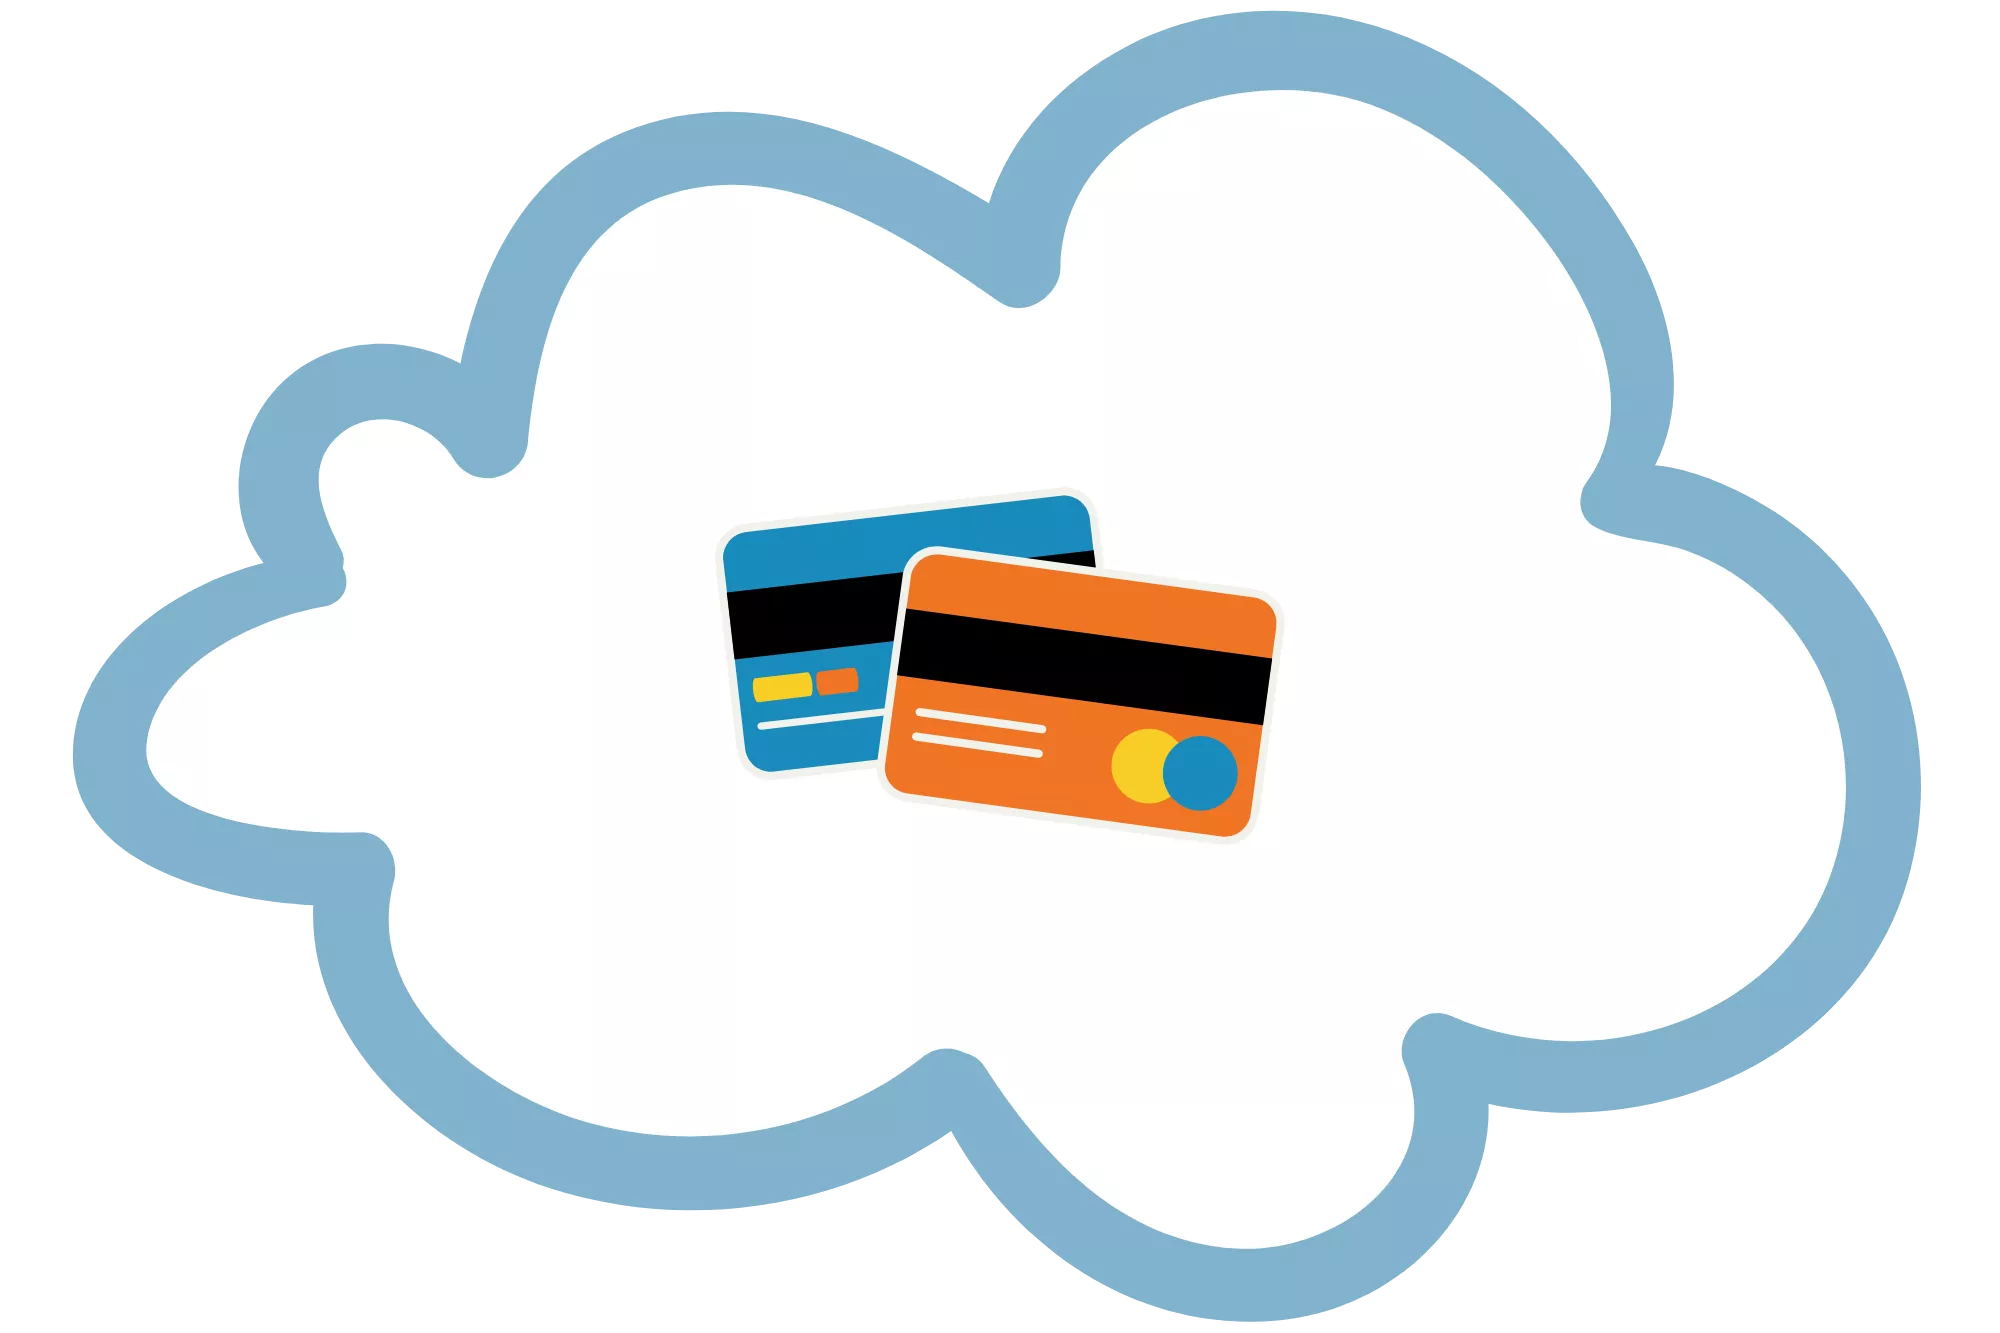 A cloud with two credit cards in it to represent payment with shop pay.